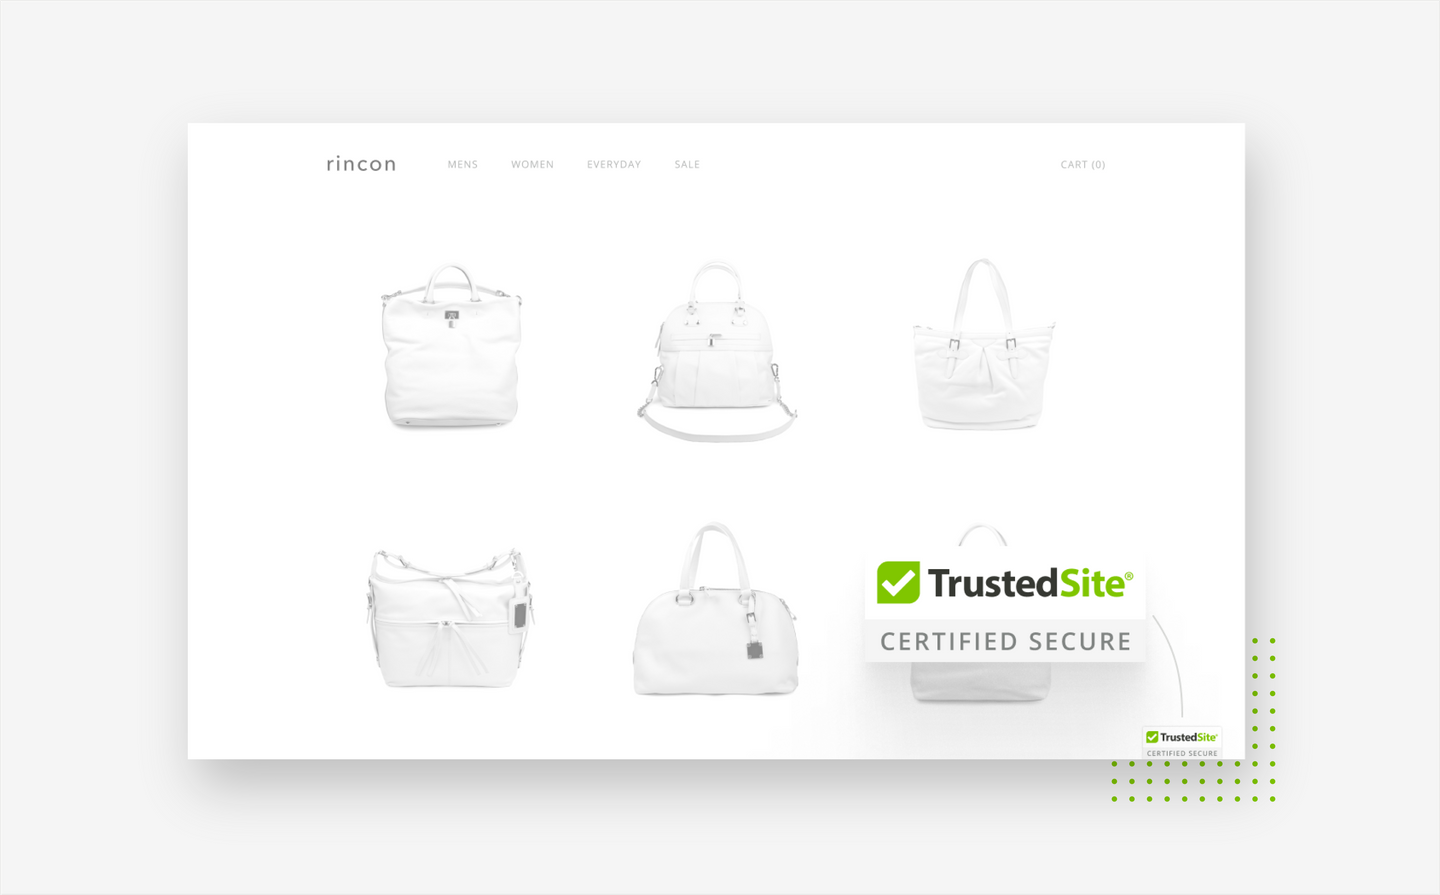 Where to Place 5 Types of Trust Badges on Ecommerce Sites